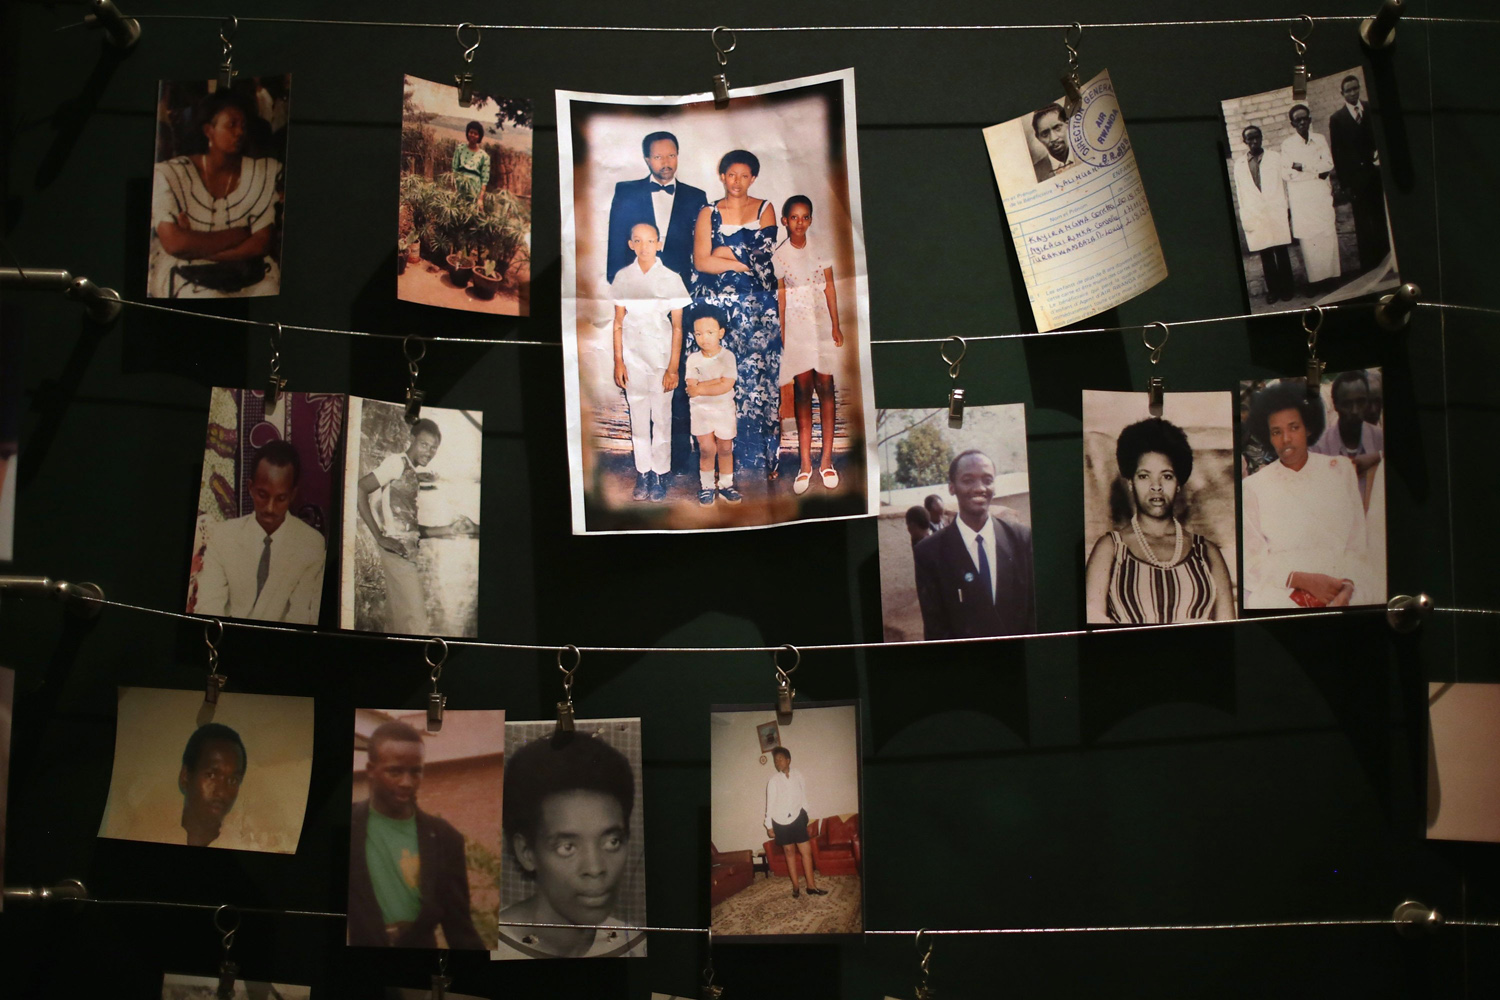 Apr. 5, 2014. Family photos of victims of the 1994 Rwanda genocide hang inside the Kigali Genocide Memorial Centre  in Kigali, Rwanda. Rwanda is preparing to commemorate the 20th anniversary of the country's 1994 genocide, when more than 800,000 ethnic Tutsi and moderate Hutus were slaughtered over a 100 day period.